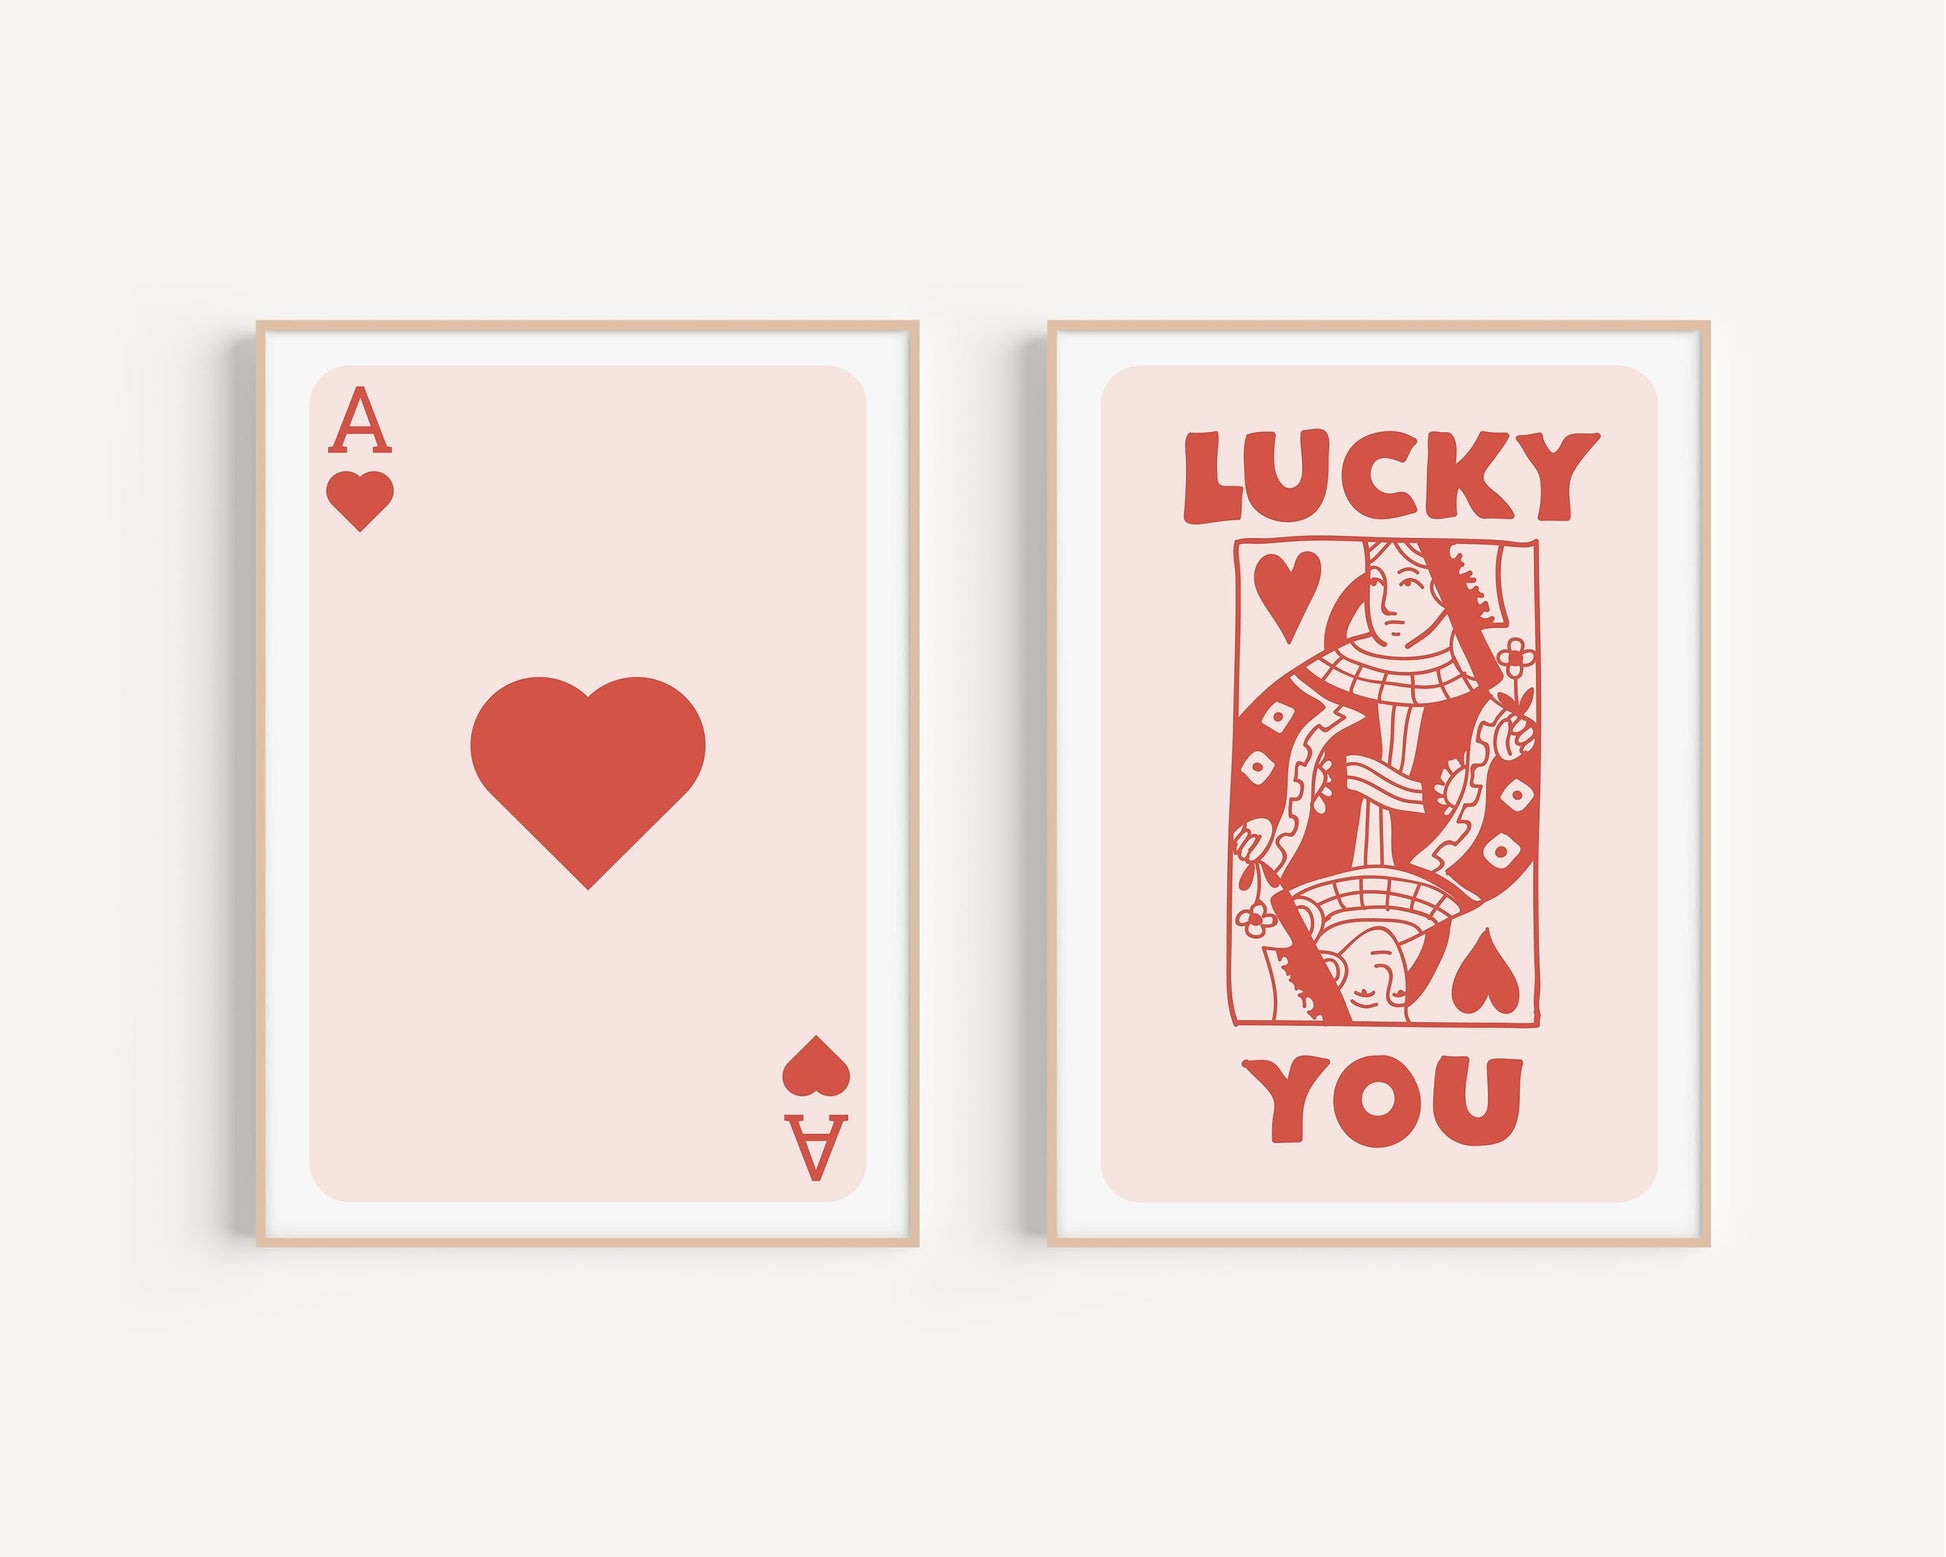 King / Queen Playing Card Set, His & Hers Wall Art, Vintage Style, Set of 2  Prints, Wall Decor, Digital Download, Retro Decor, Printable Art -  UK